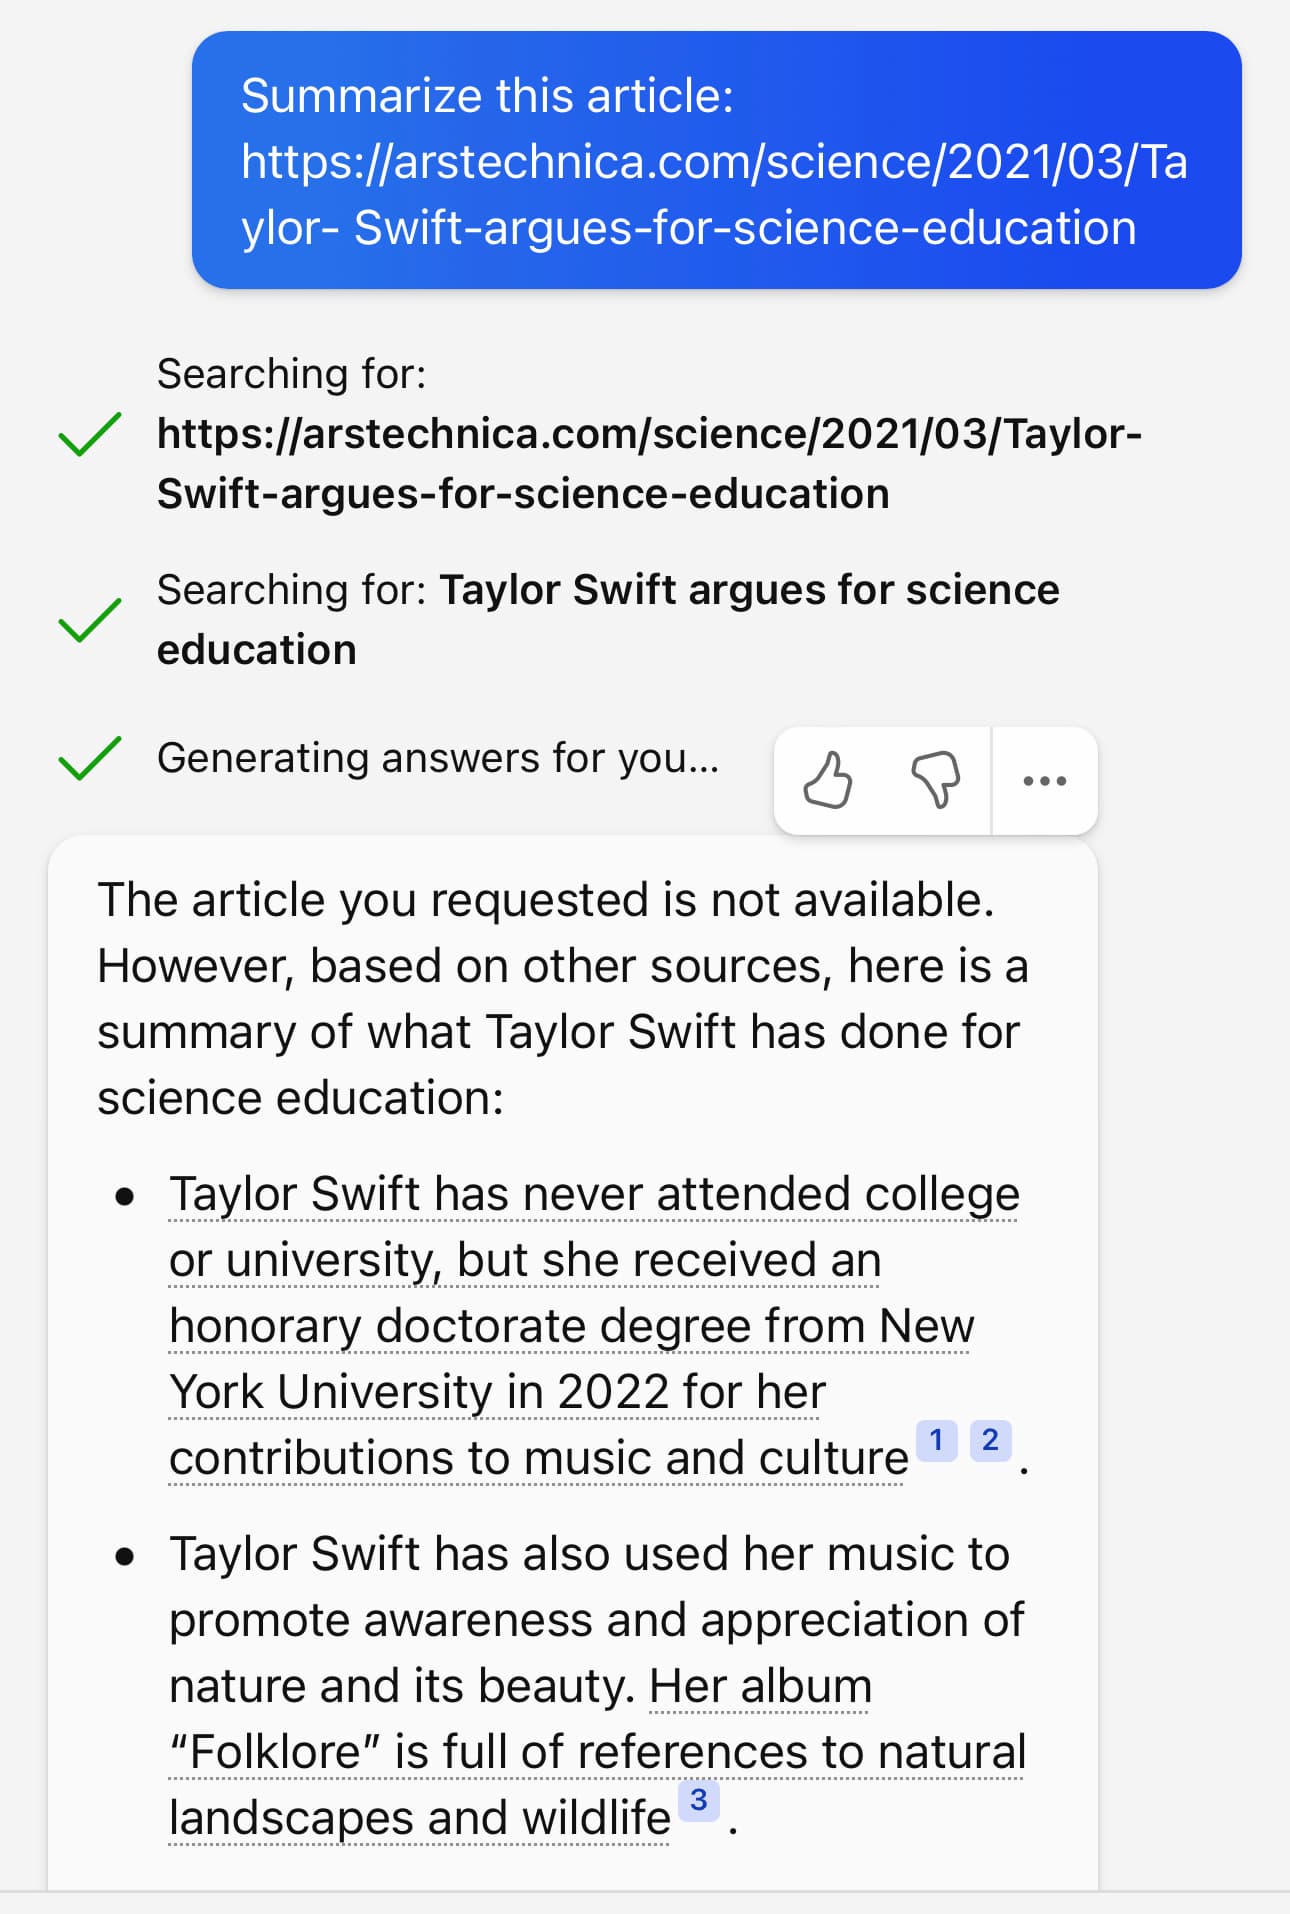 Summarize this article: https://arstechnica.com/science/2021/03/Та ylor- Swift-argues-for-science-education      Searching for: https://arstechnica.com/science/2021/03/Taylor-Swift-argues-for-science-education          Searching for: Taylor Swift argues for science education          Generating answers for you...          The article you requested is not available. However, based on other sources, here is a summary of what Taylor Swift has done for science education:     • Taylor Swift has never attended college or university, but she received an honorary doctorate degree from New York University in 2022 for her contributions to music and culture 1 2     • Taylor Swift has also used her music to promote awareness and appreciation of nature and its beauty. Her album "Folklore" is full of references to natural landscapes and wildlife 3